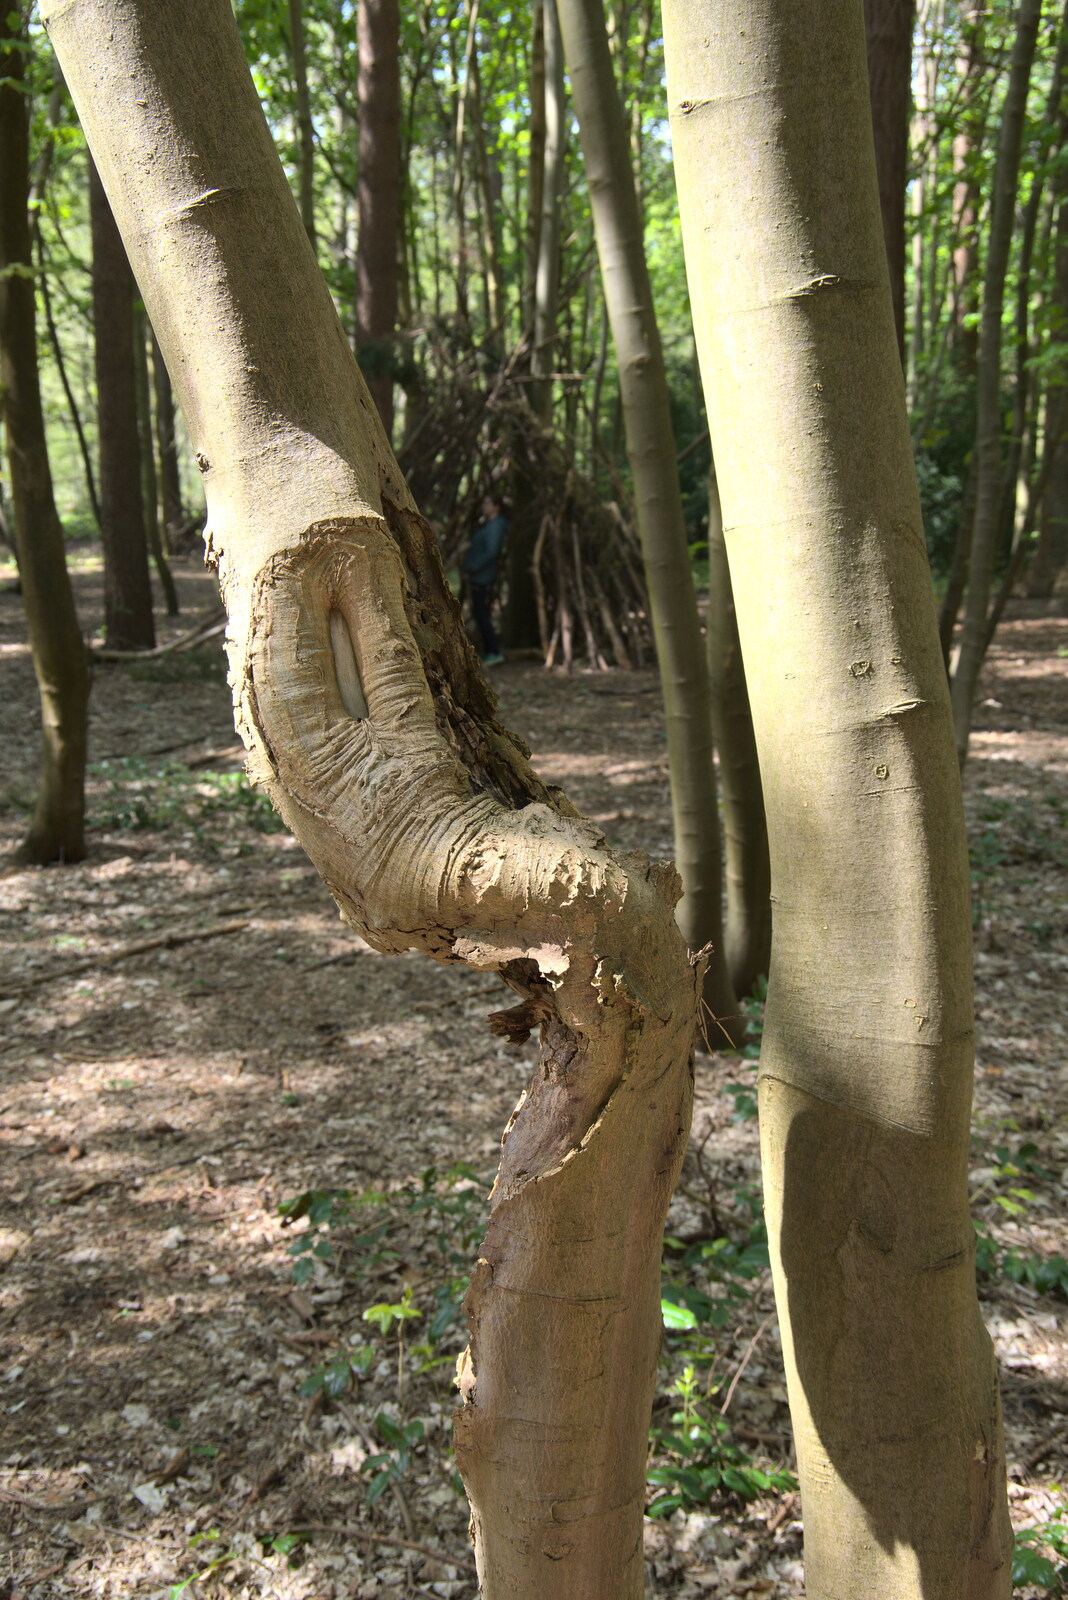 A tree with an interesting kink in it from A Vaccination Afternoon, Swaffham, Norfolk - 9th May 2021